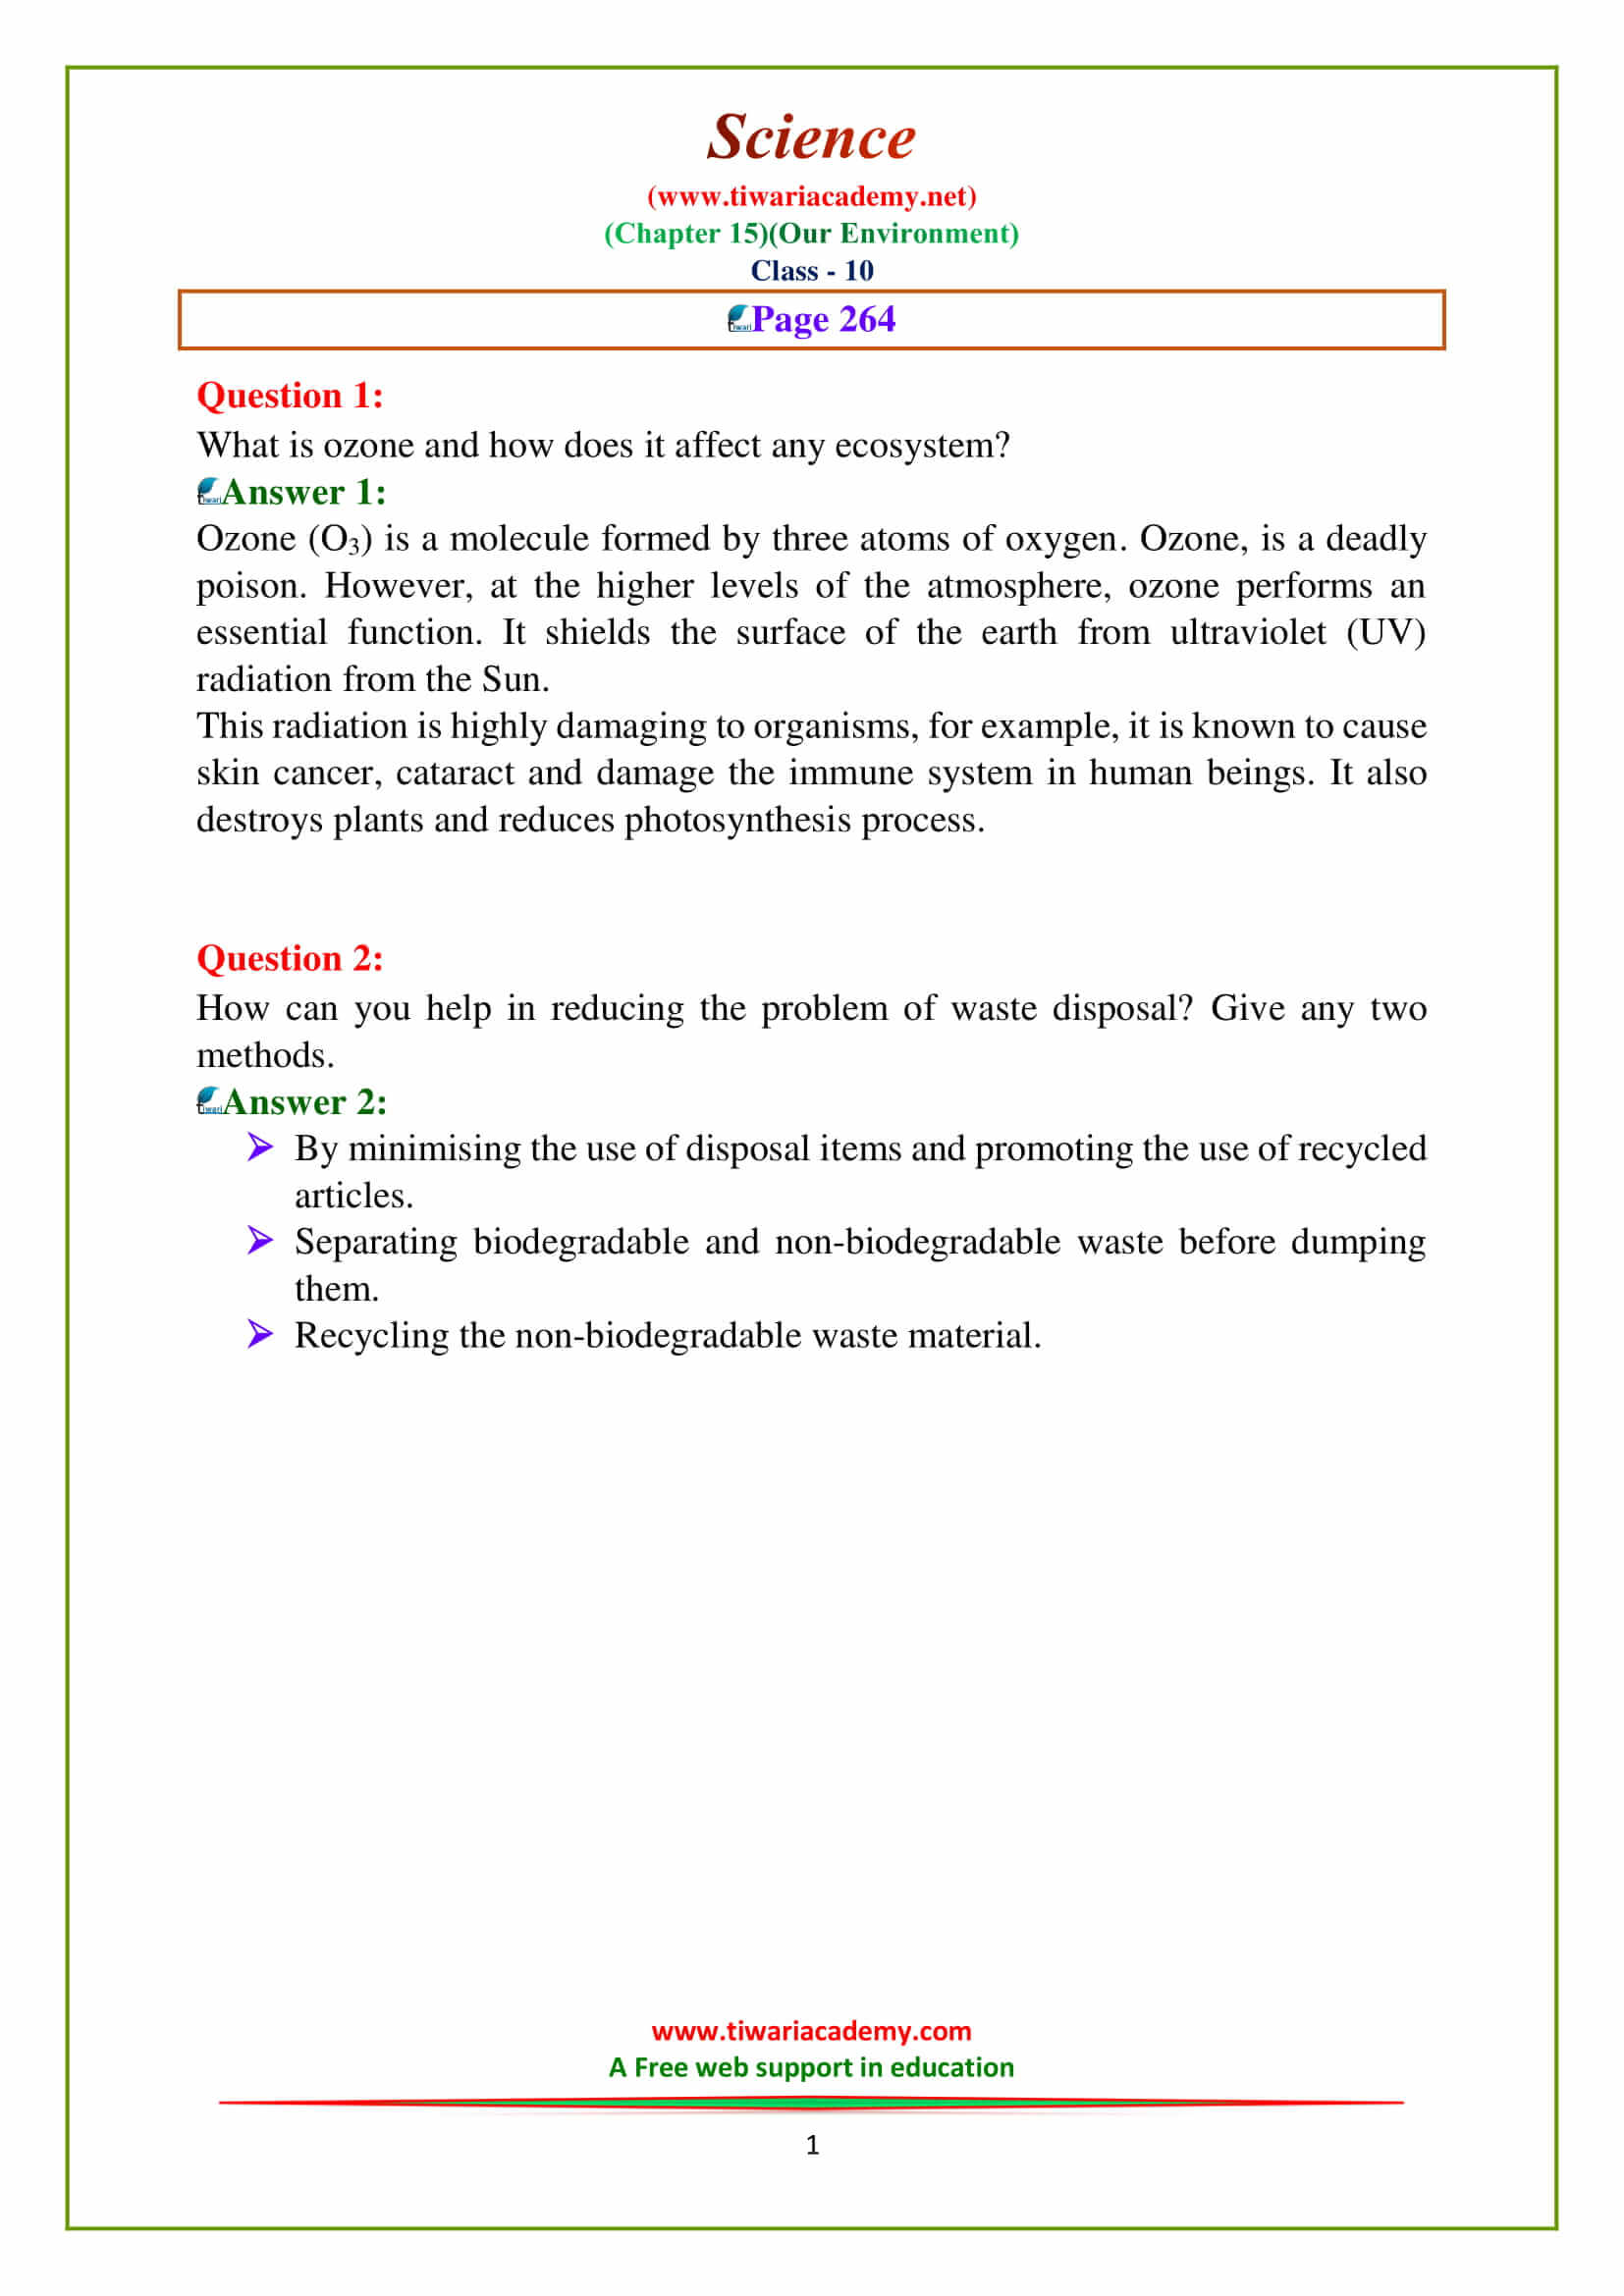 Class 10 Science Chapter 15 Intext questions given on page 264